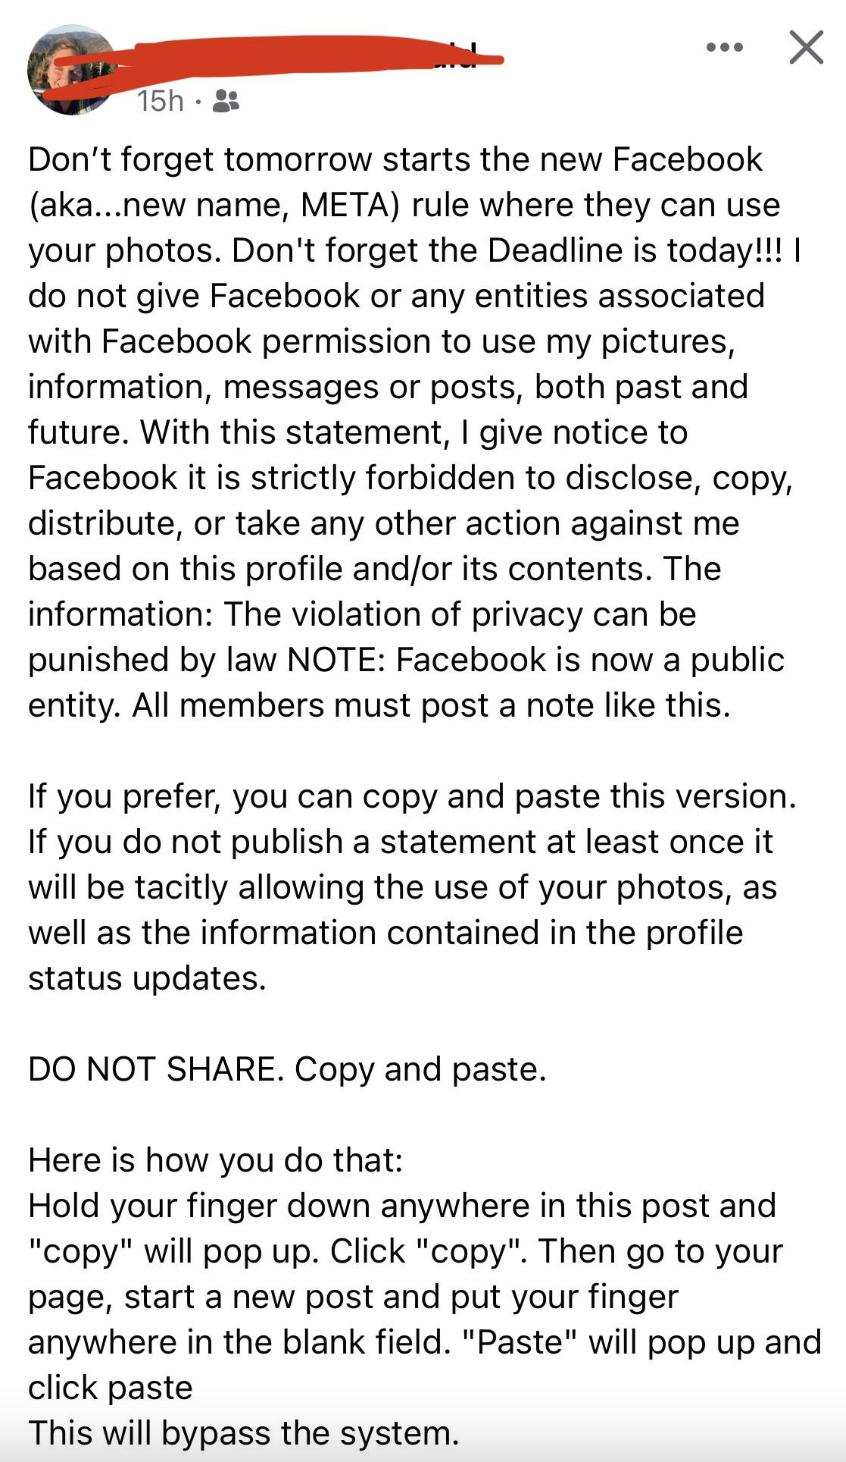 Insane People of Facebook - Don't forget tomorrow starts the new Facebook aka...new name, Meta rule where they can use your photos. Don't forget the Deadline is today!!!! do not give Facebook or any entities associated with Facebook permission to use my p